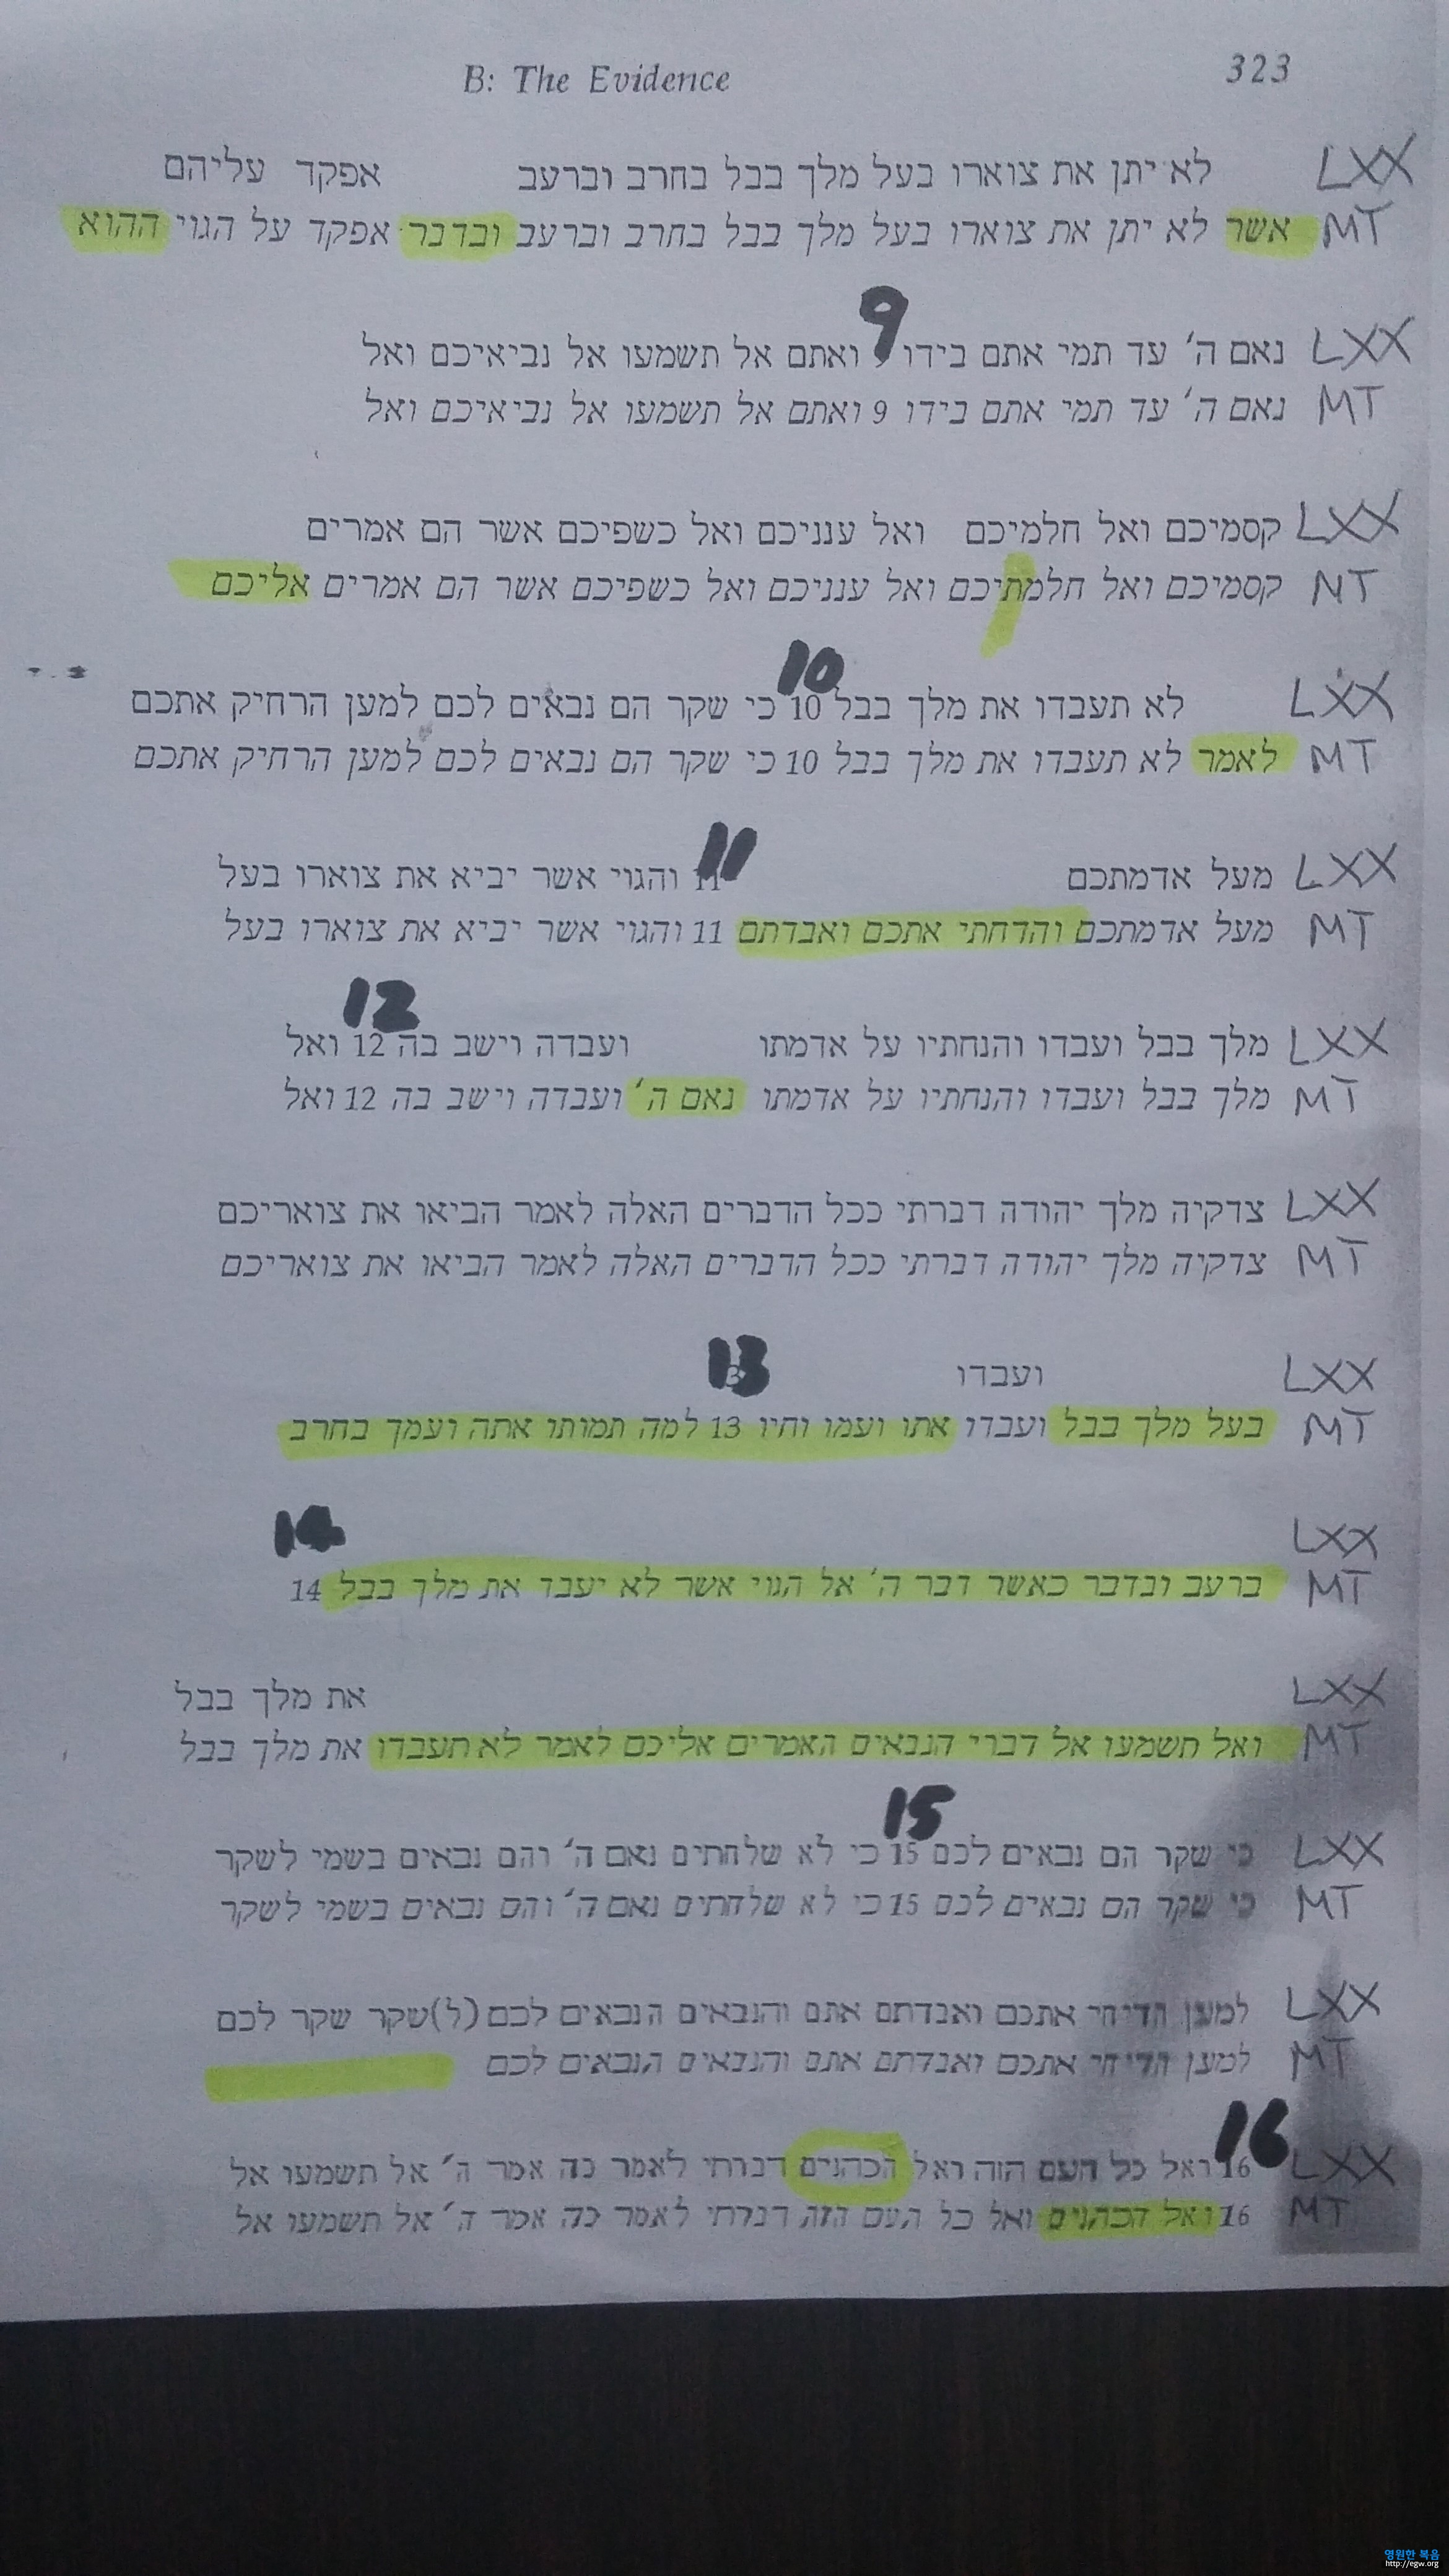 Jeremiah 27 verses 9 to 16 Septuagint and Hebrew compared by E Tov 1992 at 322 to 324.jpg